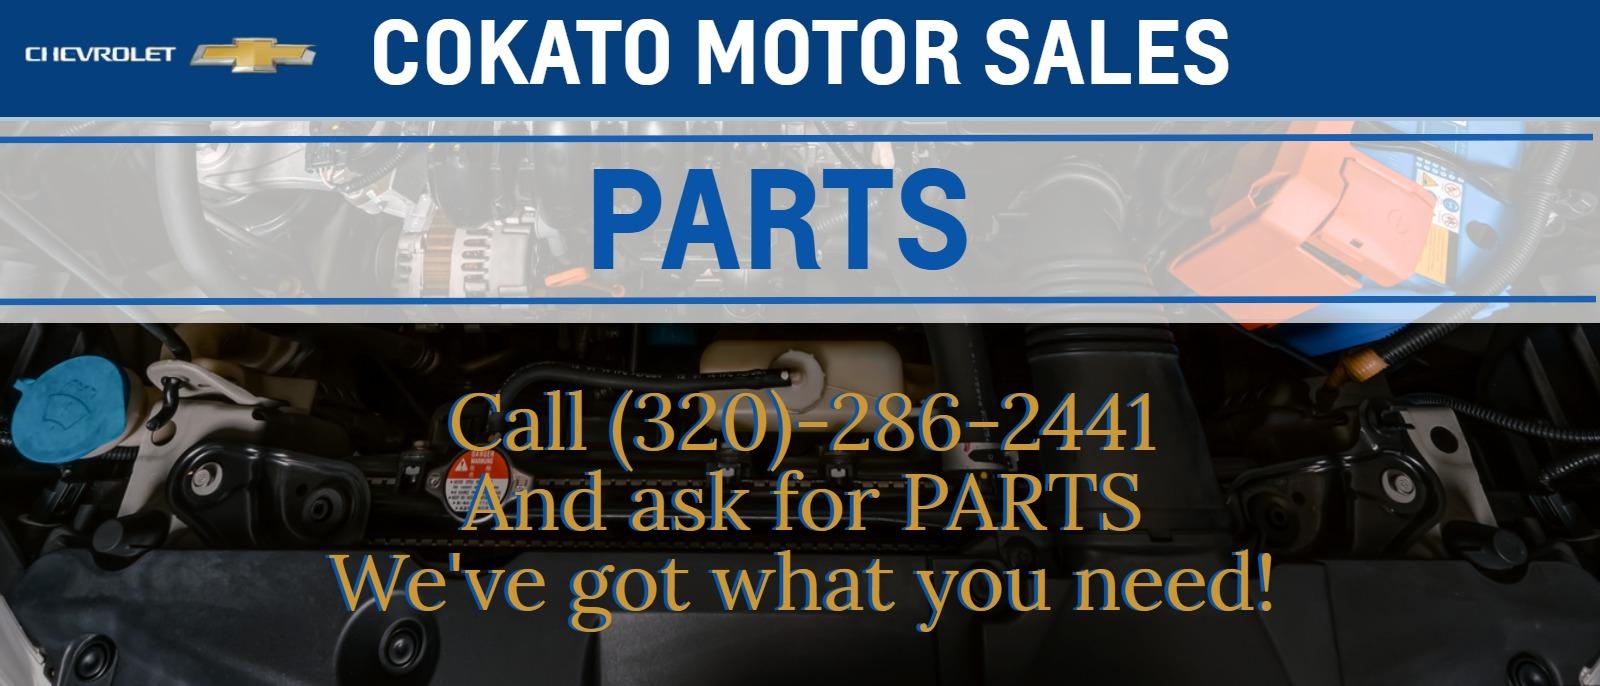 Call (320)-286-2441 And ask for PARTS We've got what you need!